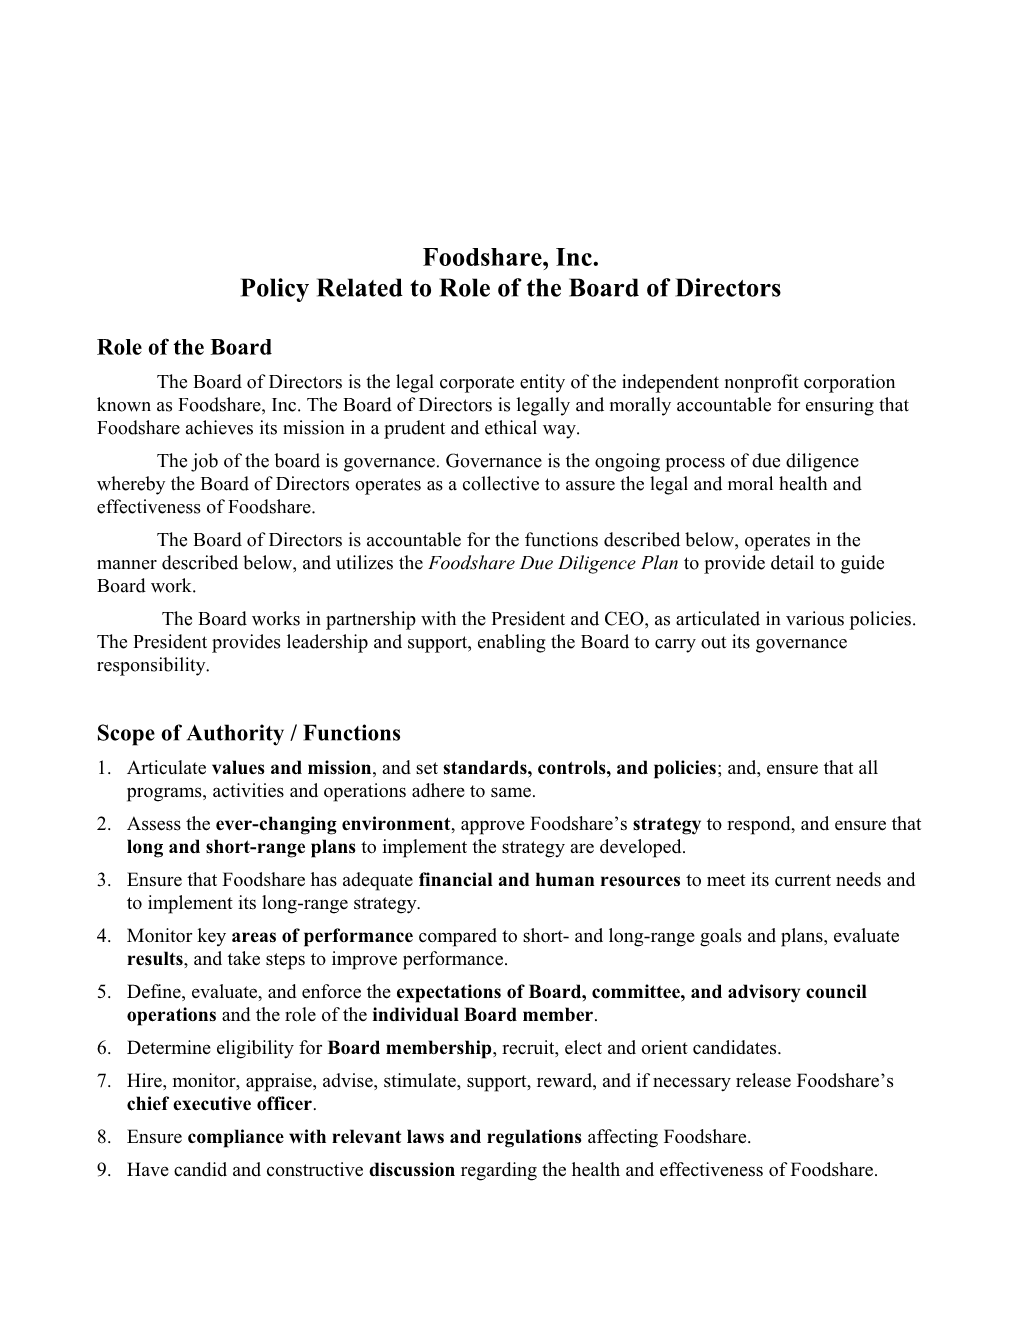 Policy Related to Role of the Board of Directors